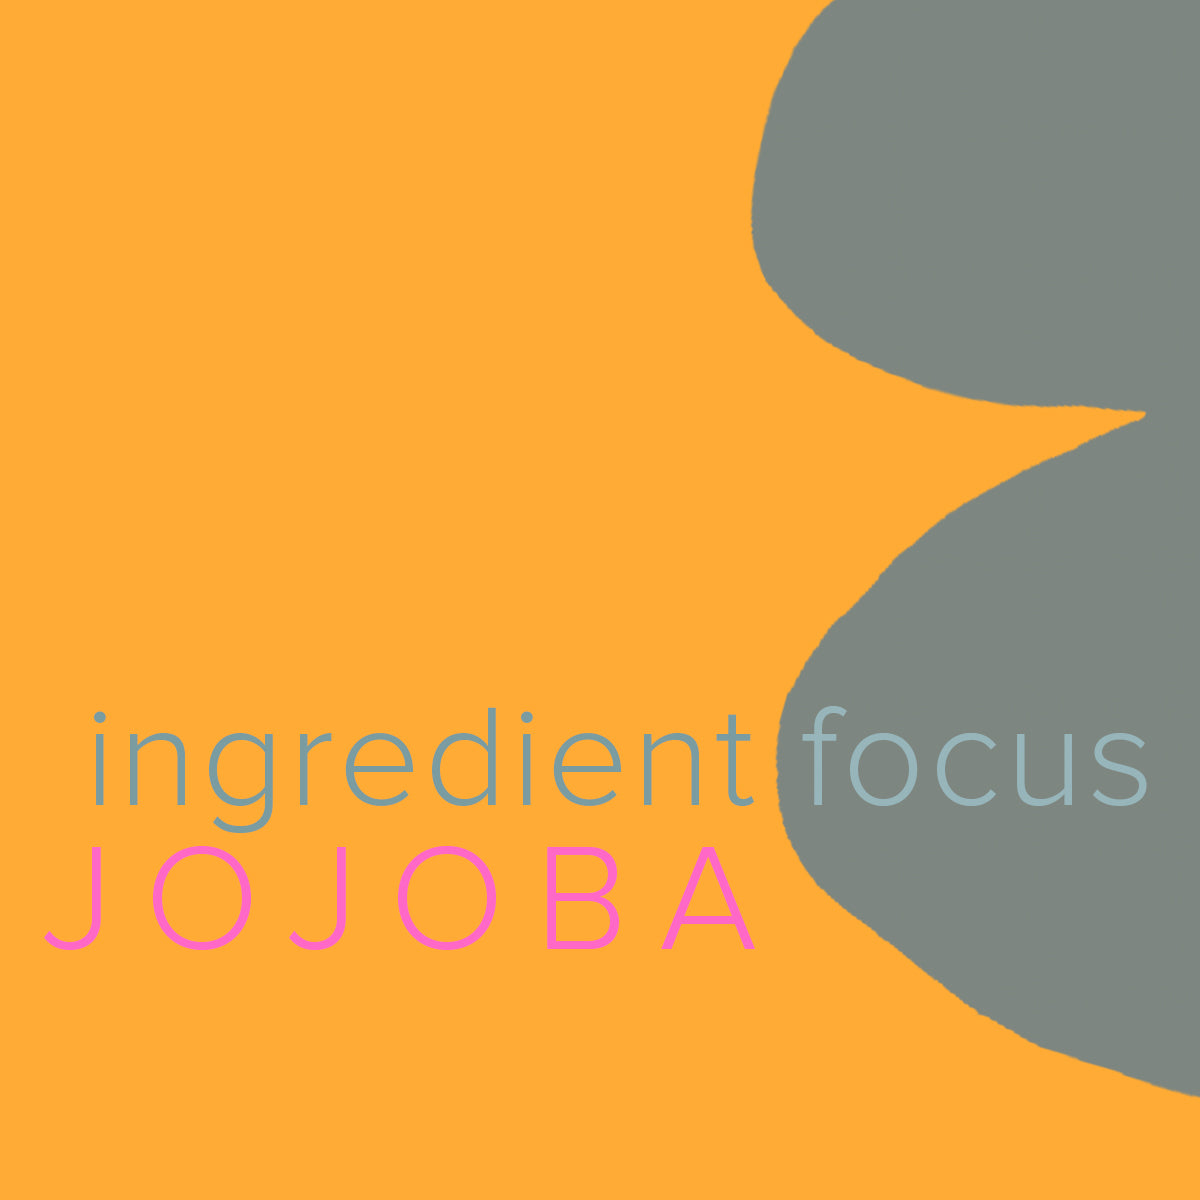 Among its many benefits, jojoba oil contains a natural sunscreen that blocks harmful UV rays. And because it so closely mimics the natural oil produced by our skin, jojoba oil can be used as a natural skin conditioner on the scalp as well as the hair.